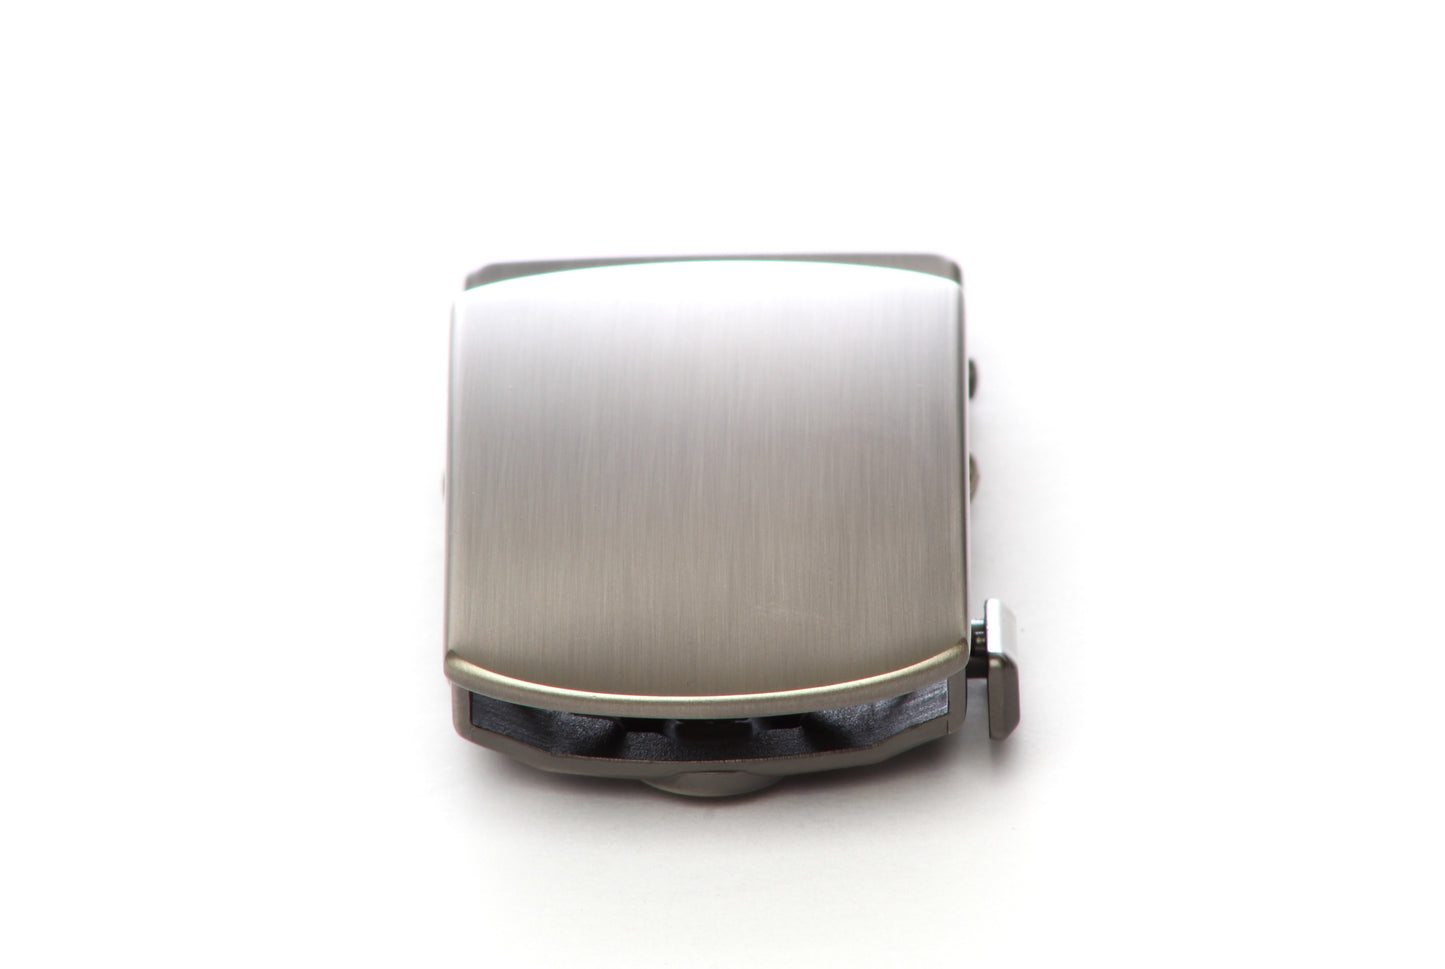 Men's classic with a curve ratchet belt buckle in gunmetal with a 1.25-inch width, front view.